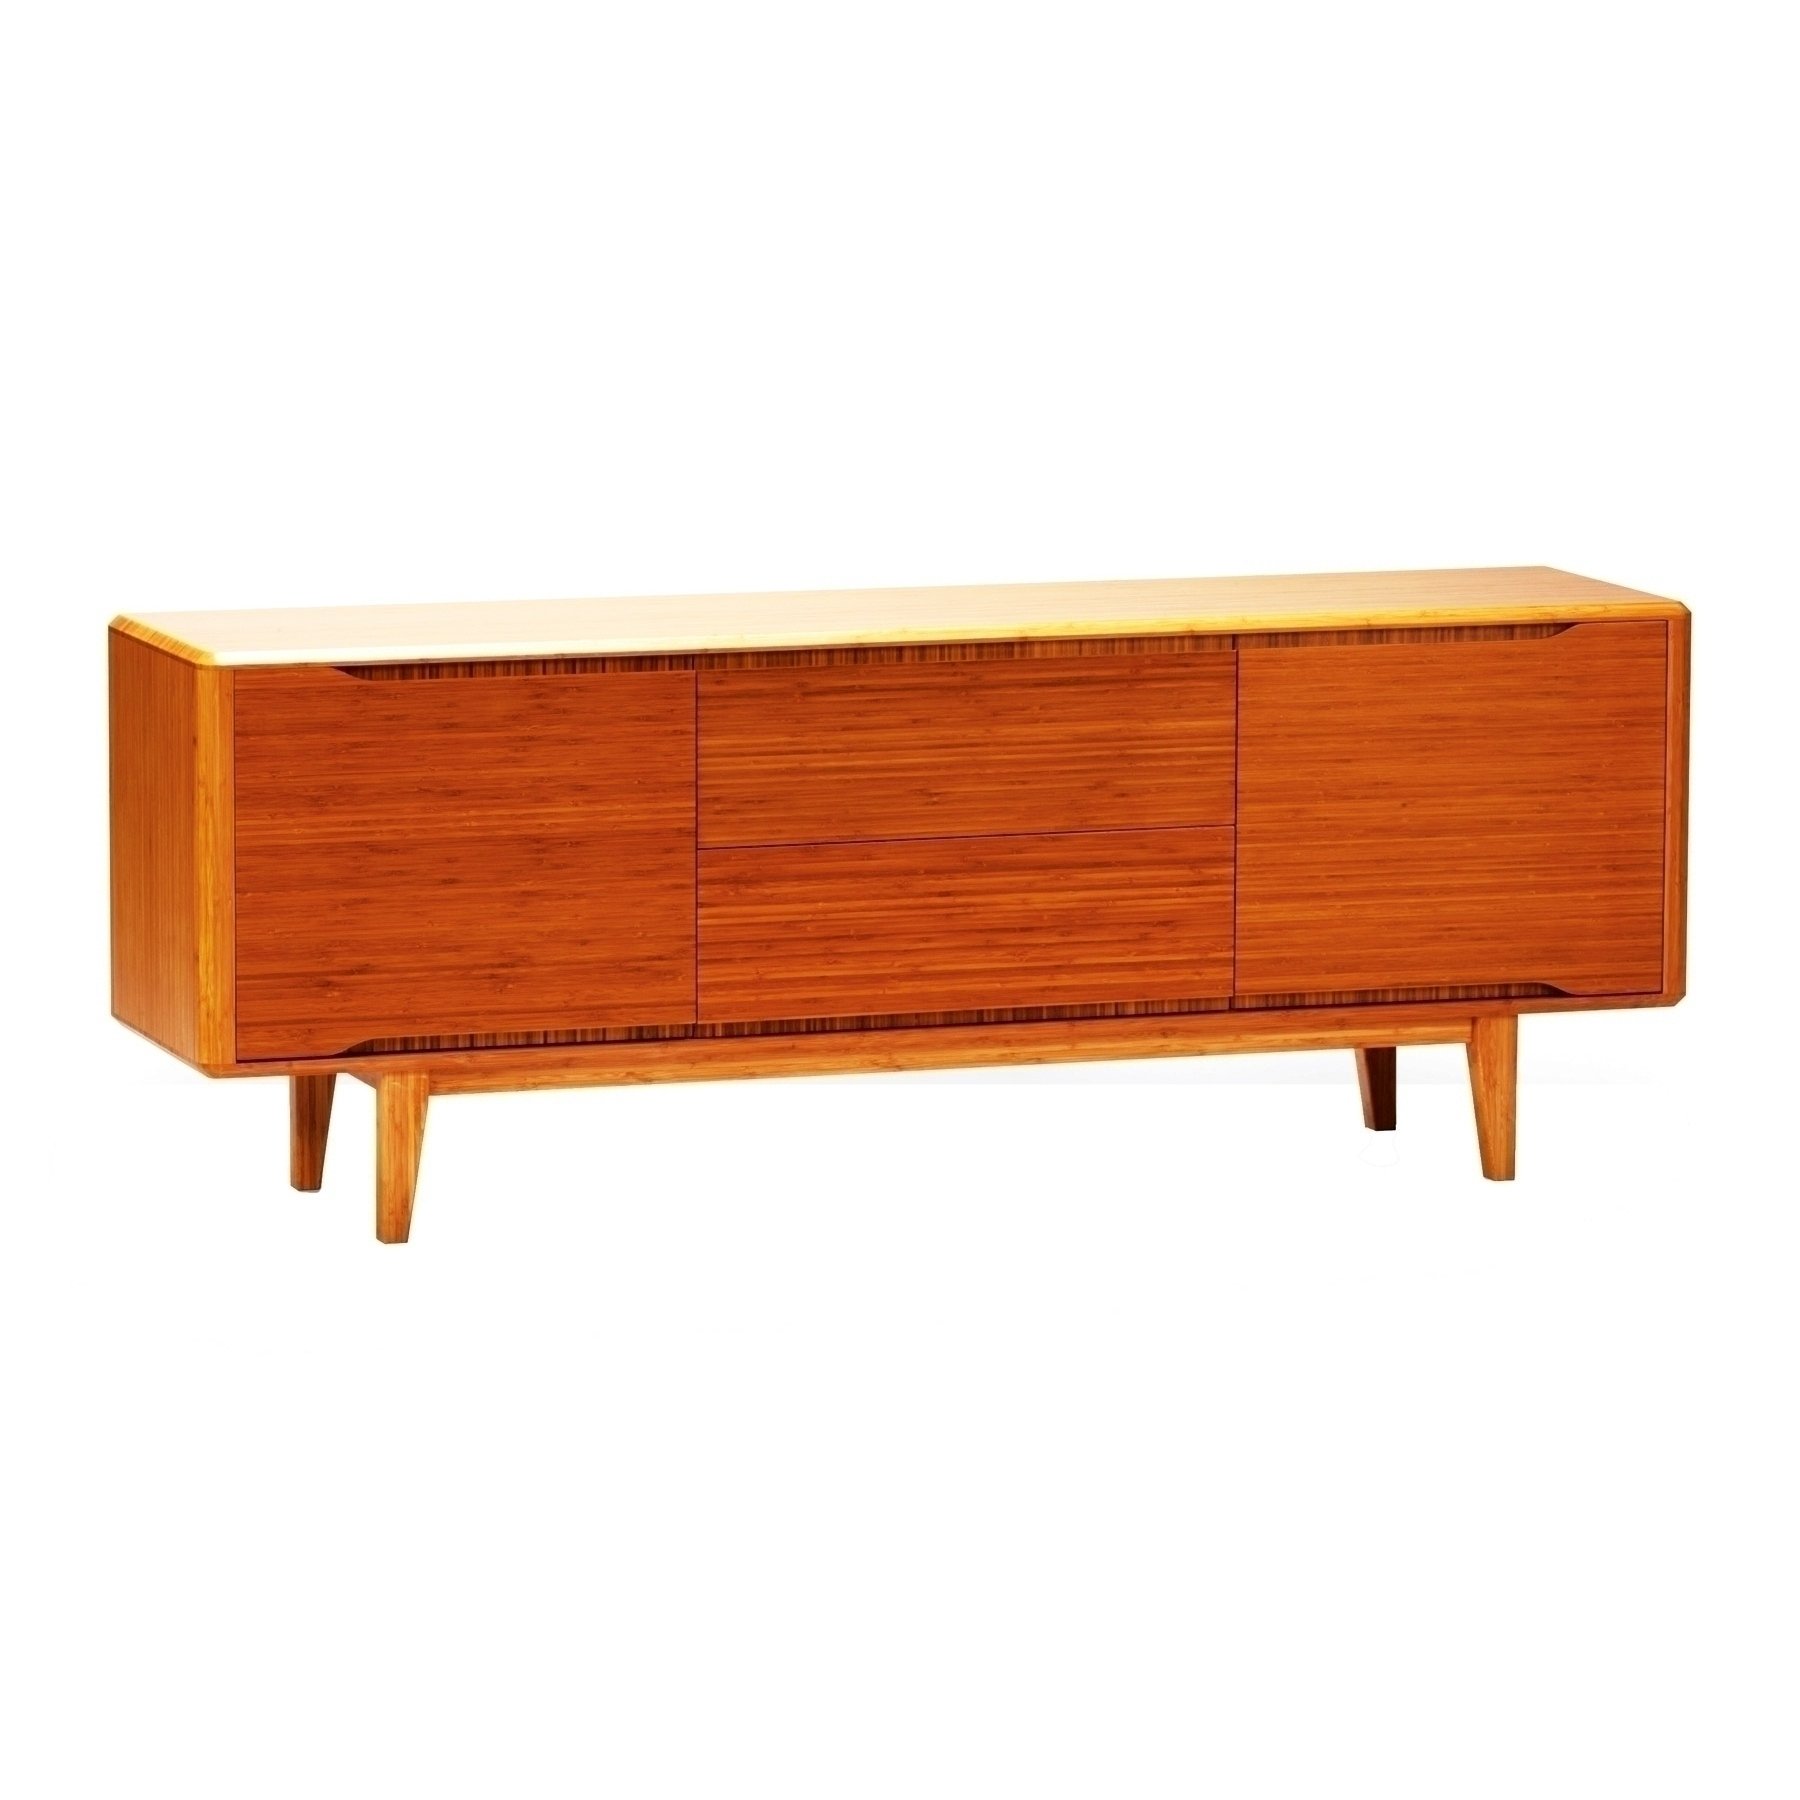 currant sideboard - caramelized